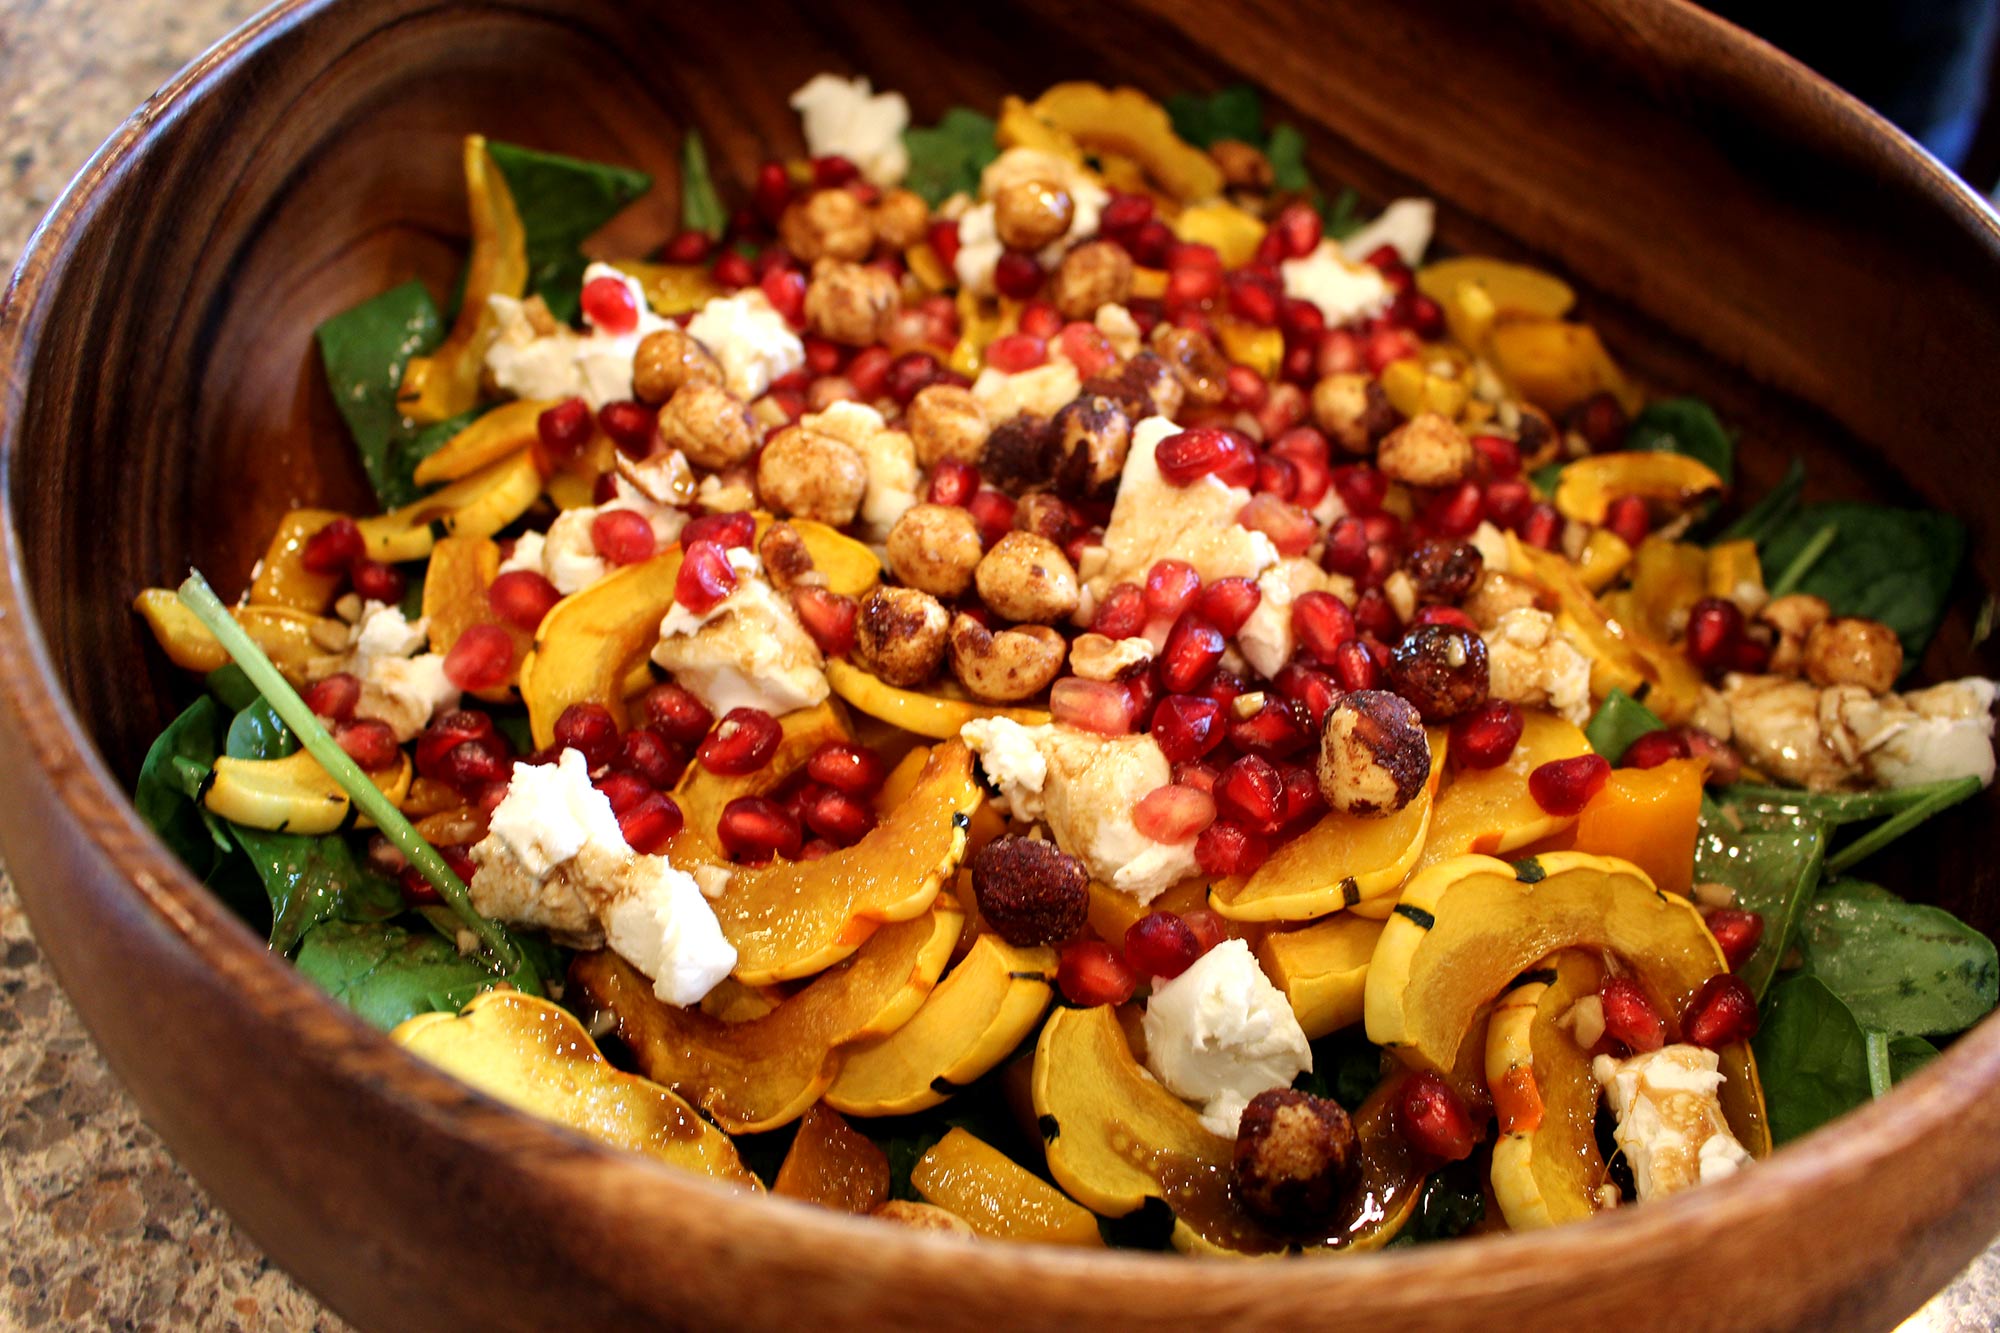 Roasted Squash Salad with Goat Cheese